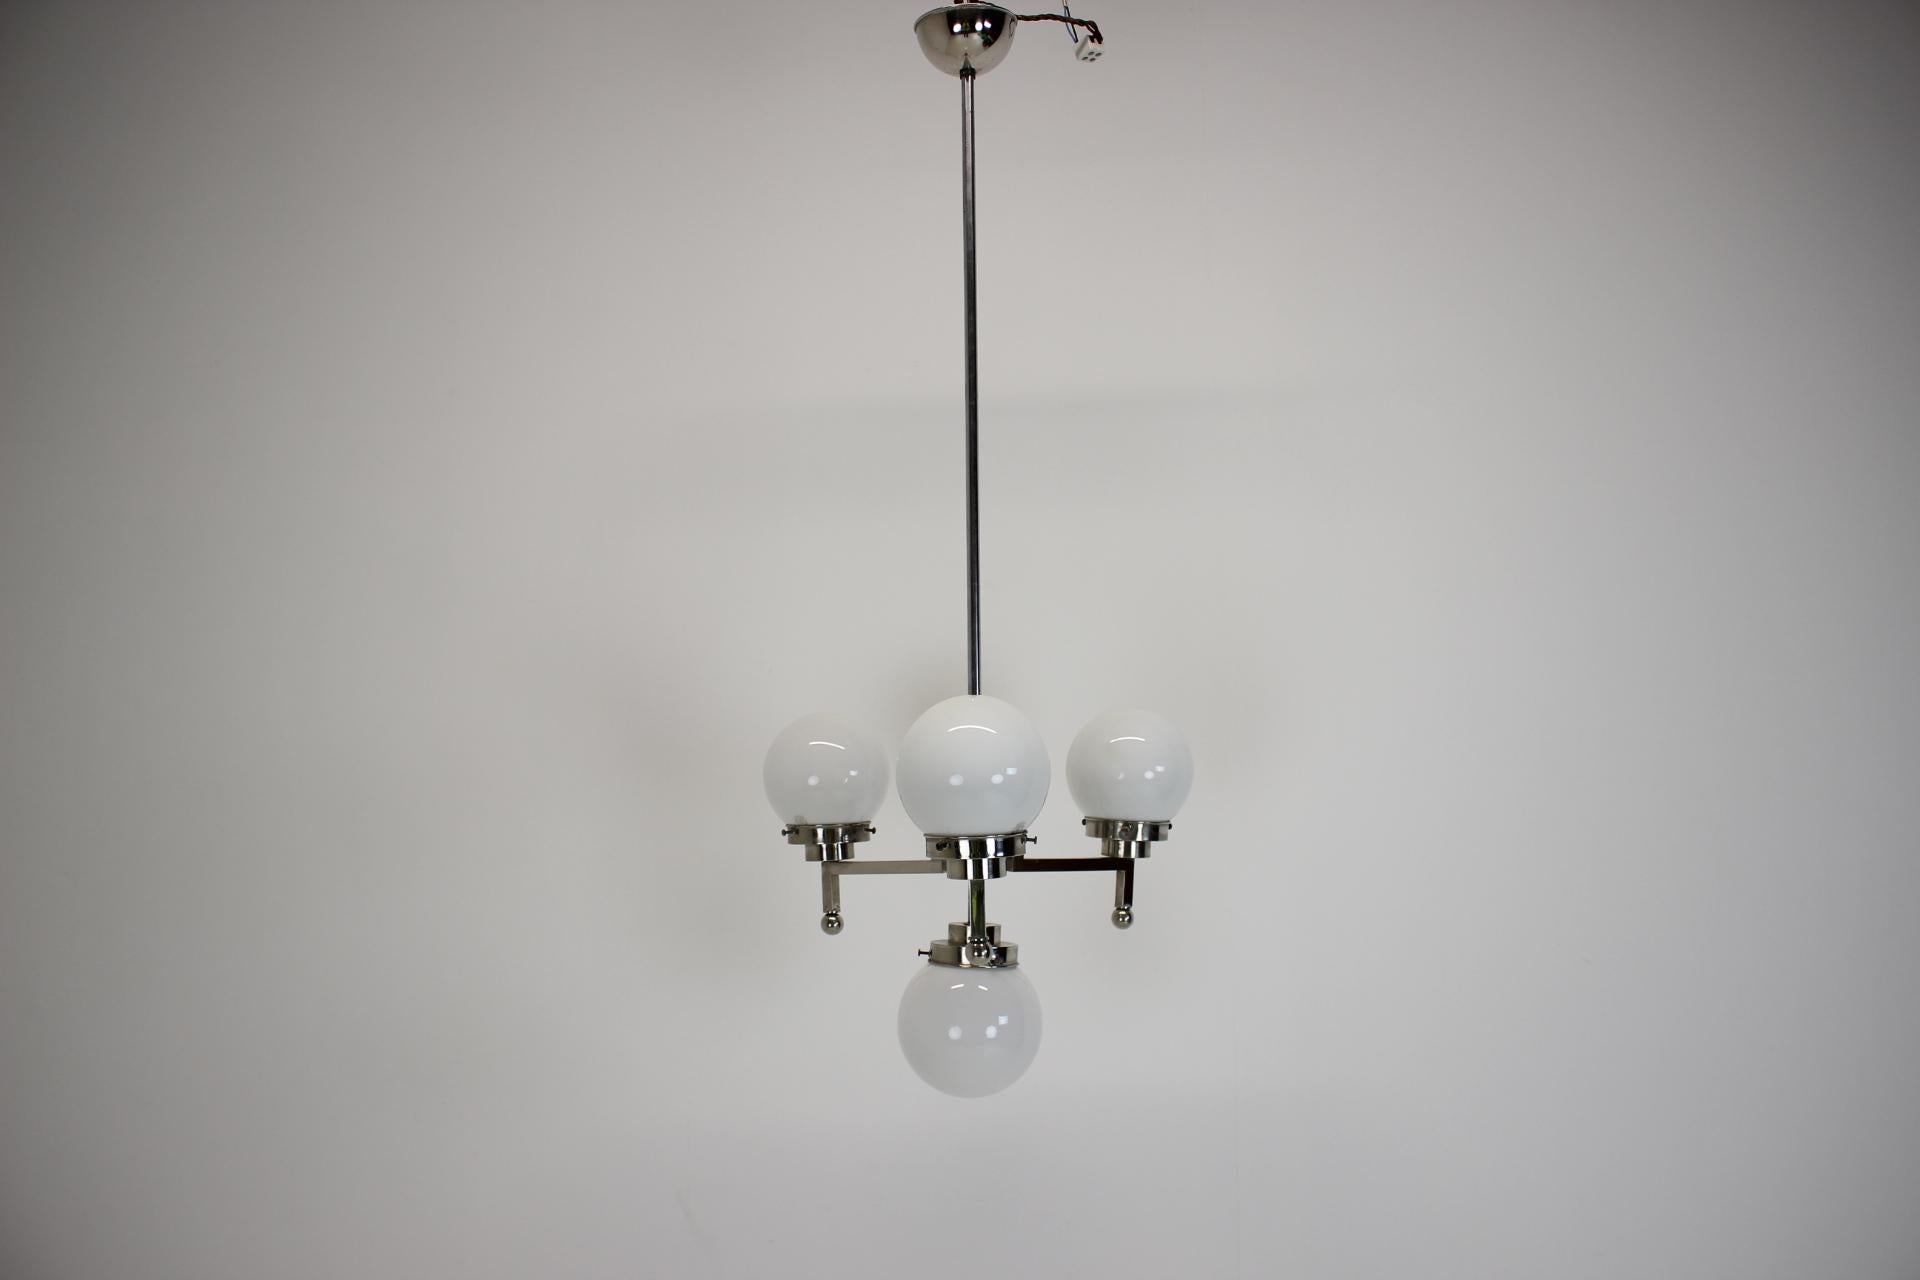 4-flamming Art Deco chandelier with opaline glass shades.
Central rod can be shortened on demand.
Two separate circuits: 1+3x60W, E25-E27 bulbs
US wiring compatible